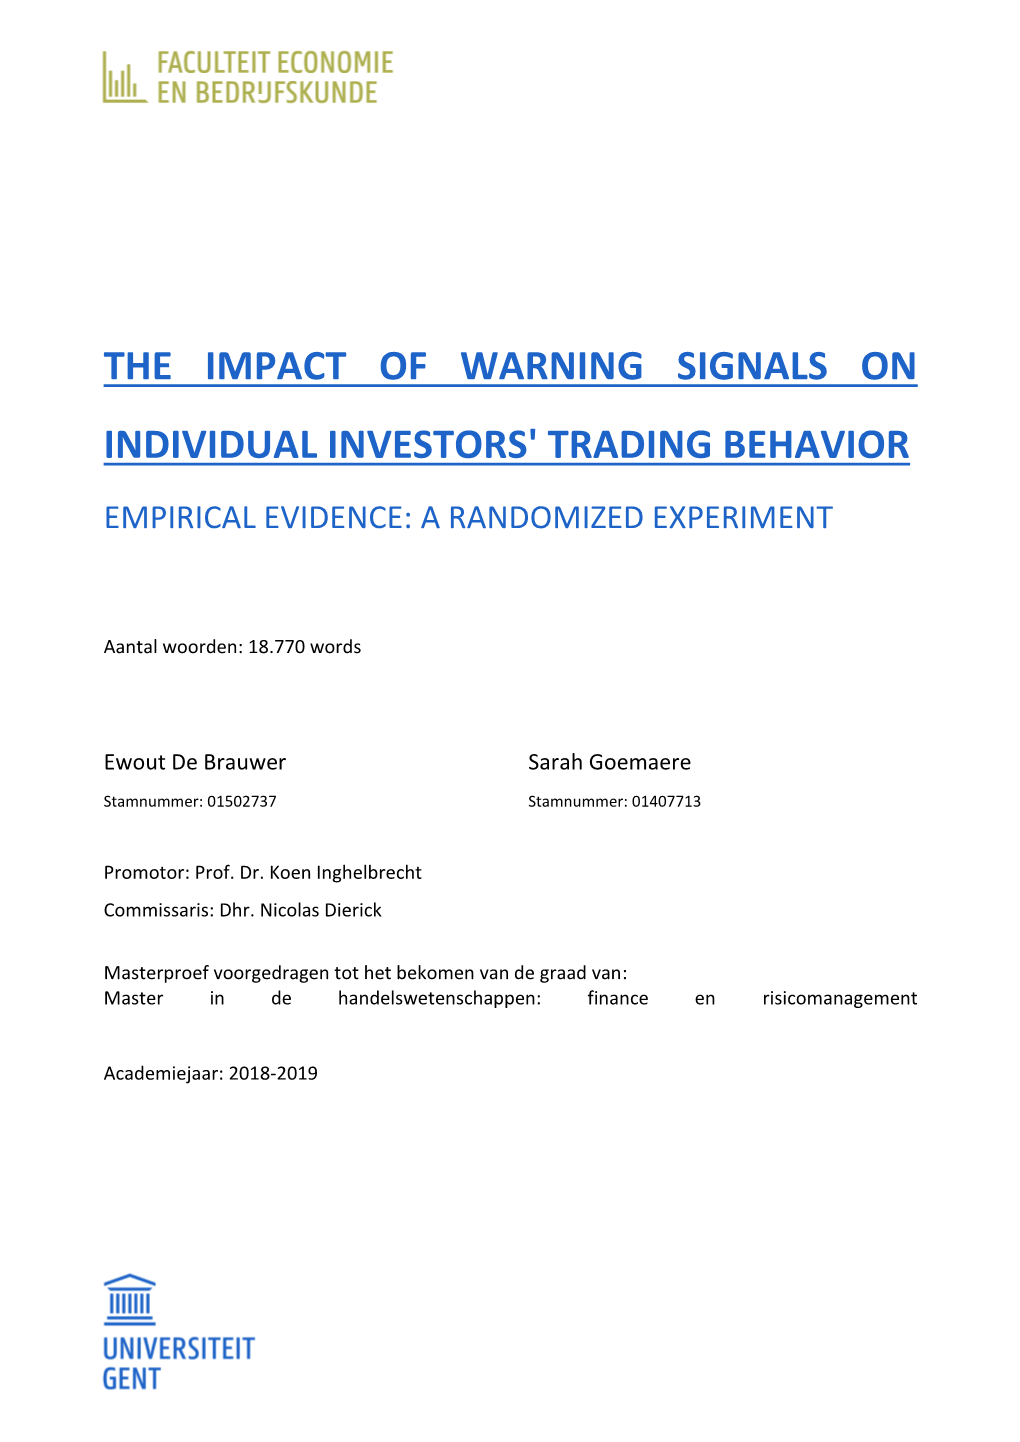 The Impact of Warning Signals on Individual Investors' Trading Behavior Empirical Evidence: a Randomized Experiment